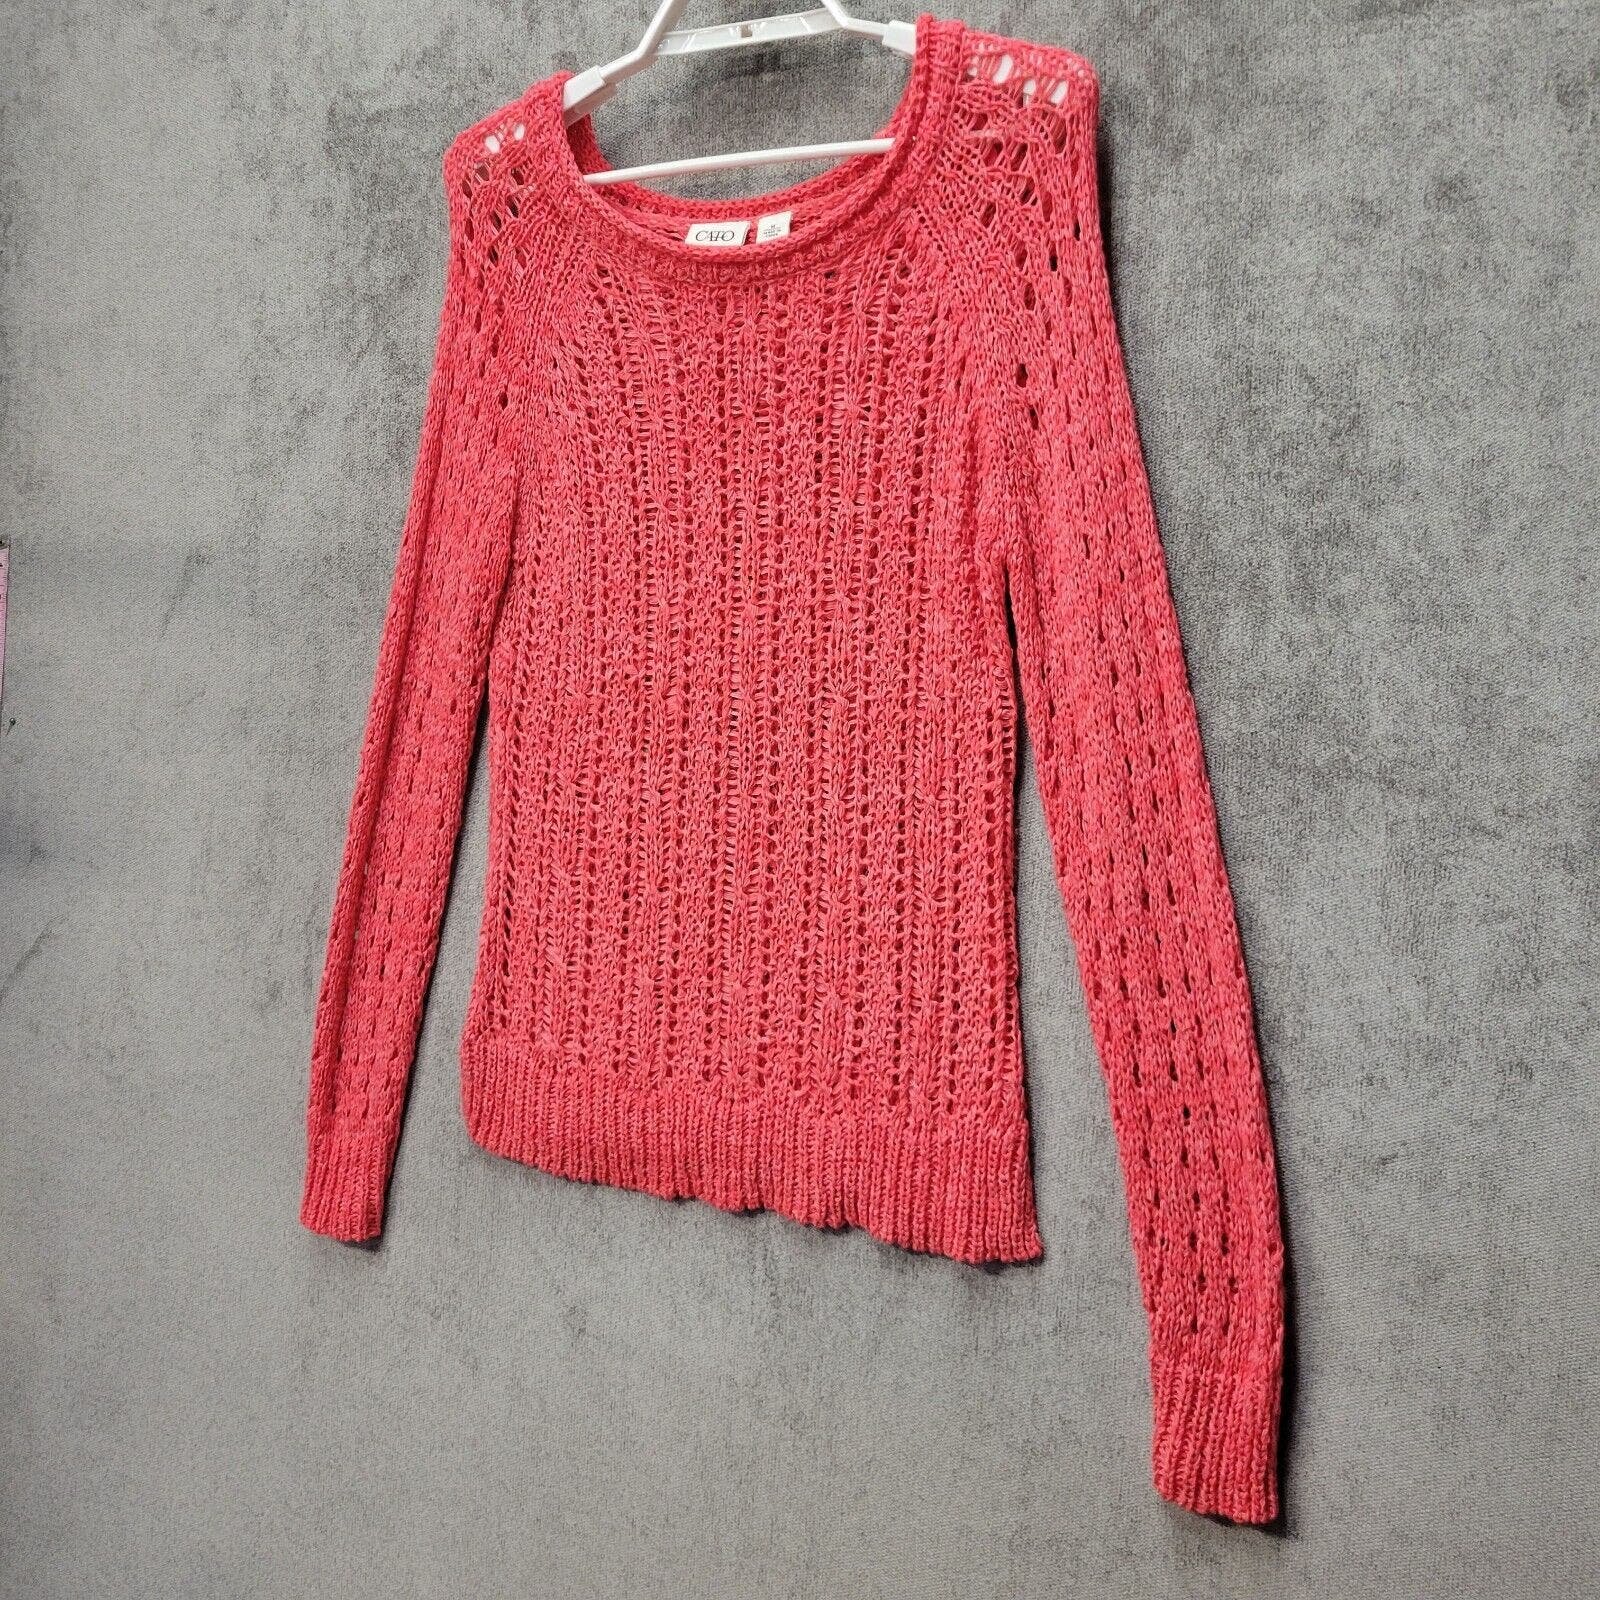 Great Cato Sweater Open Loose Knit Womens Medium Coral Round Neck Pull-Over GzX4QUFbY Online Shop